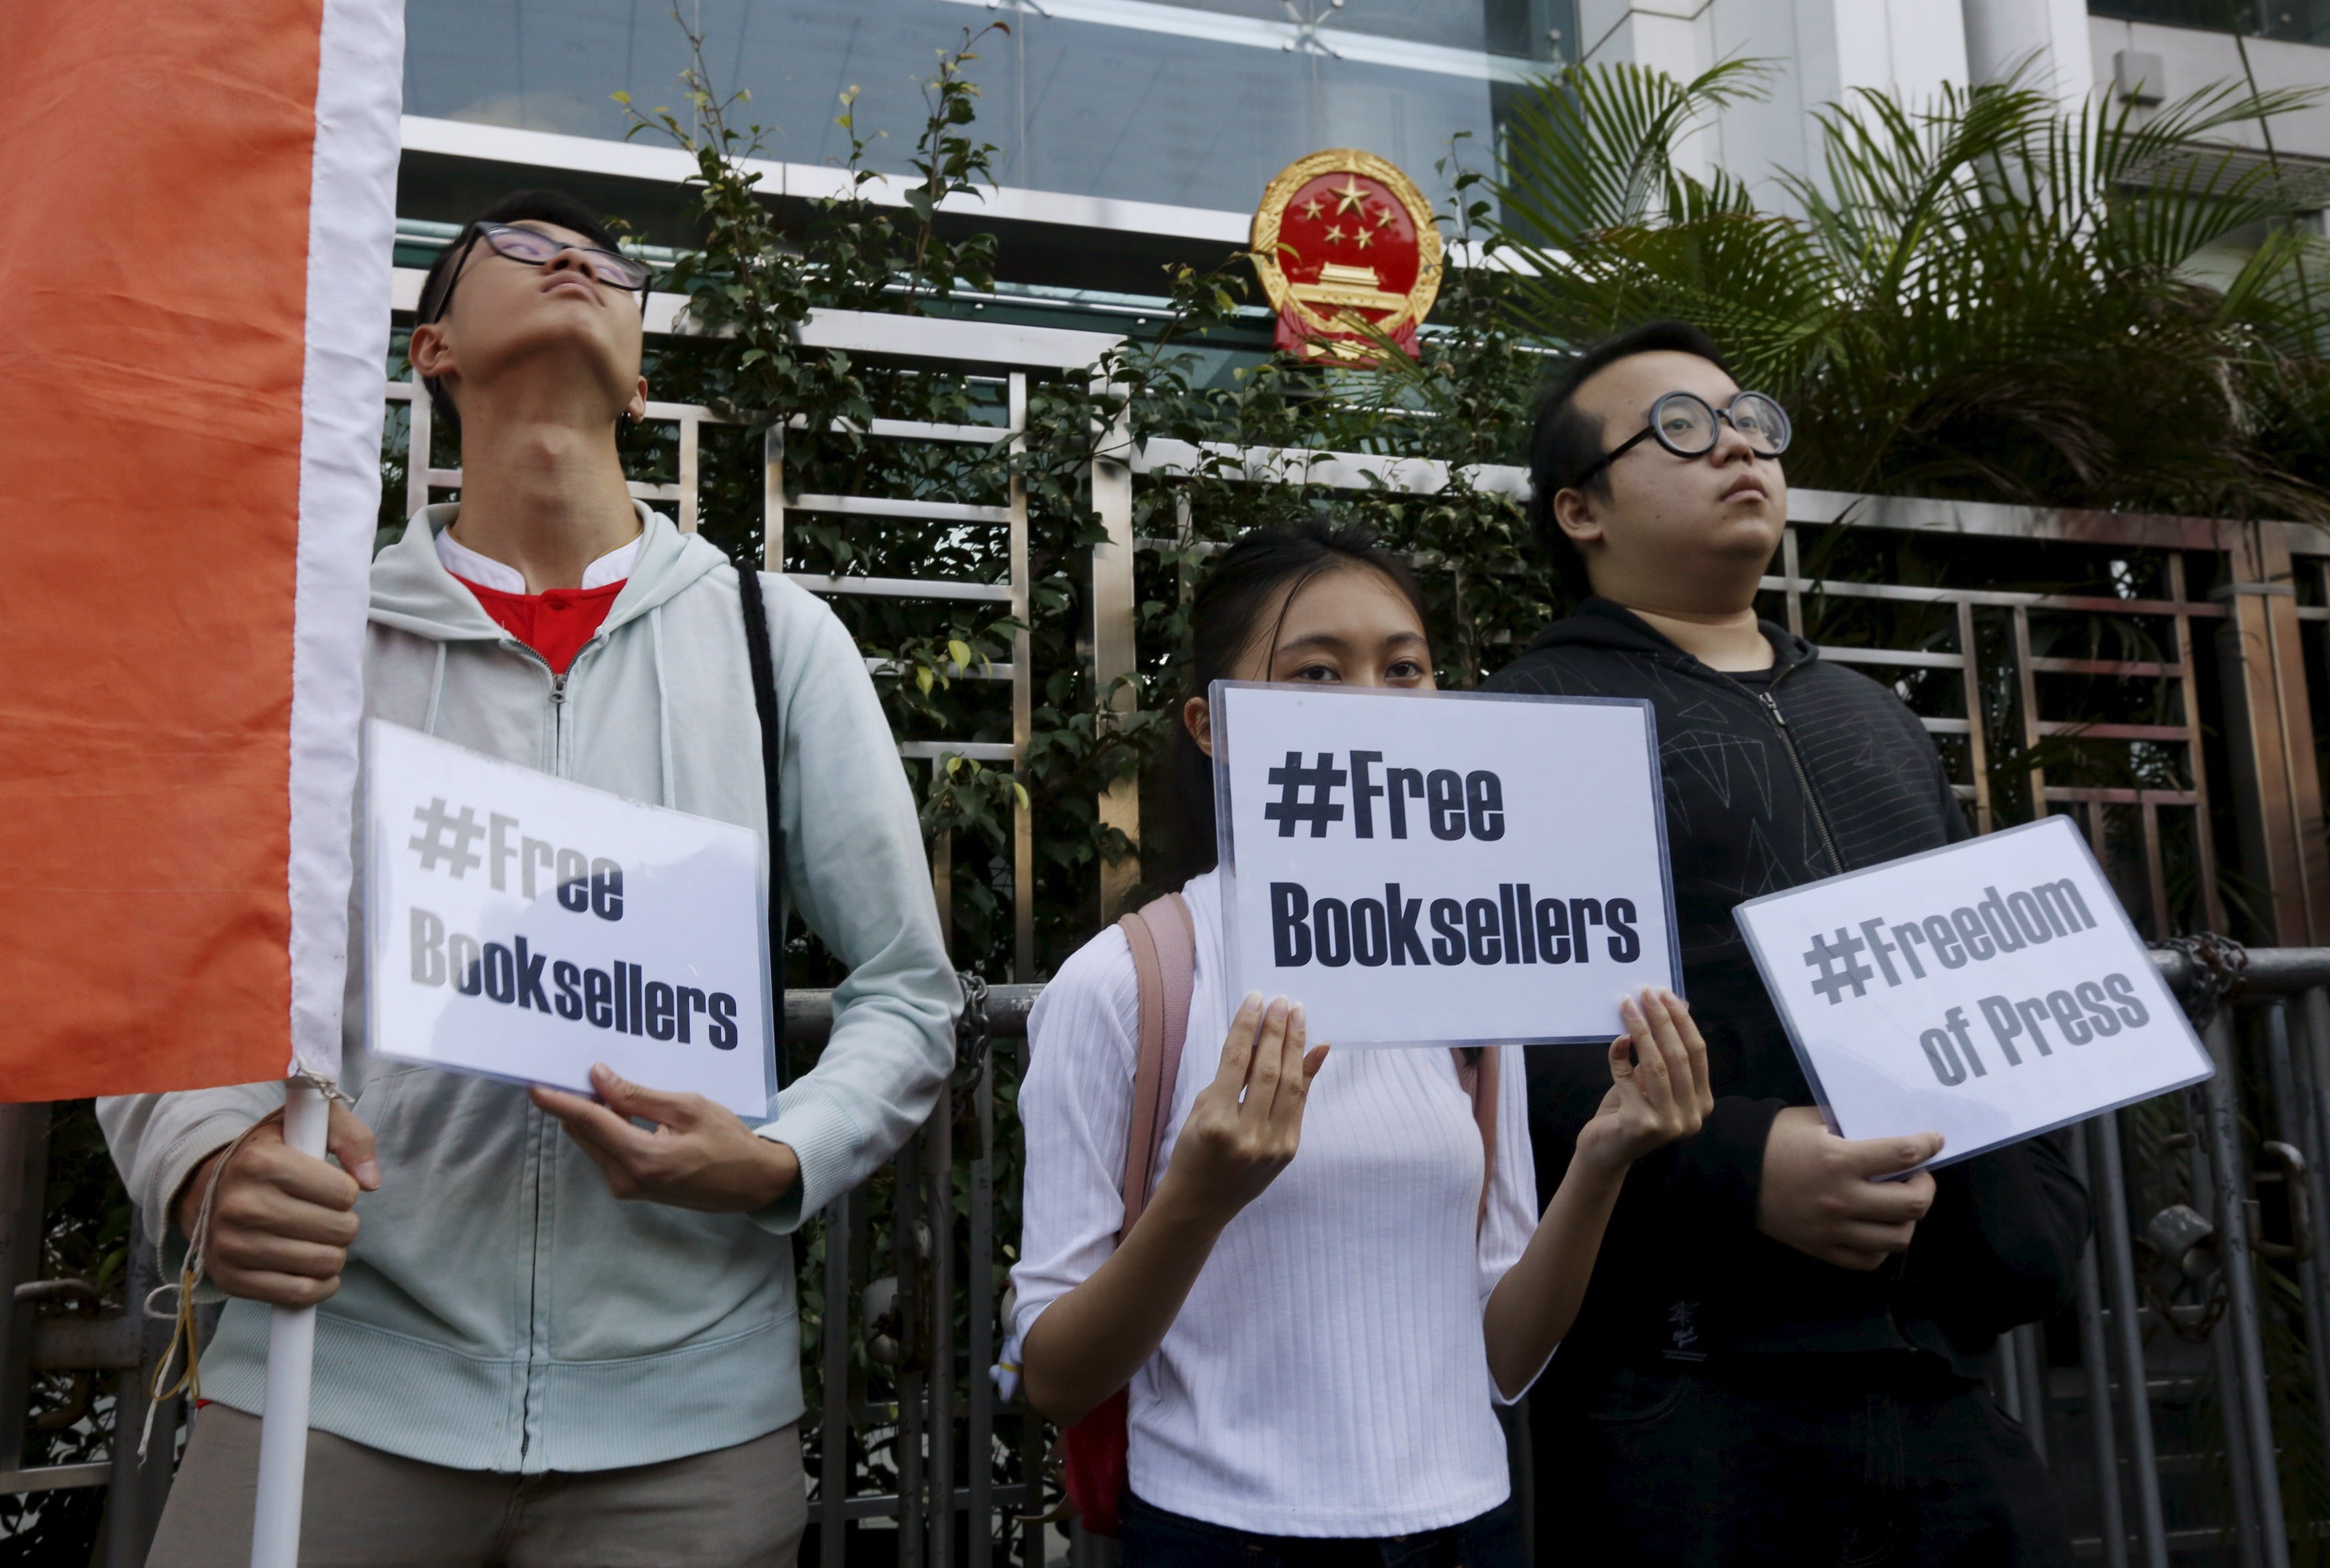 Members of student group Scholarism hold up placards during a protest about the disappearances of booksellers outside China's liaison office in Hong Kong,. Photo Credit: Reuters/達誌影像